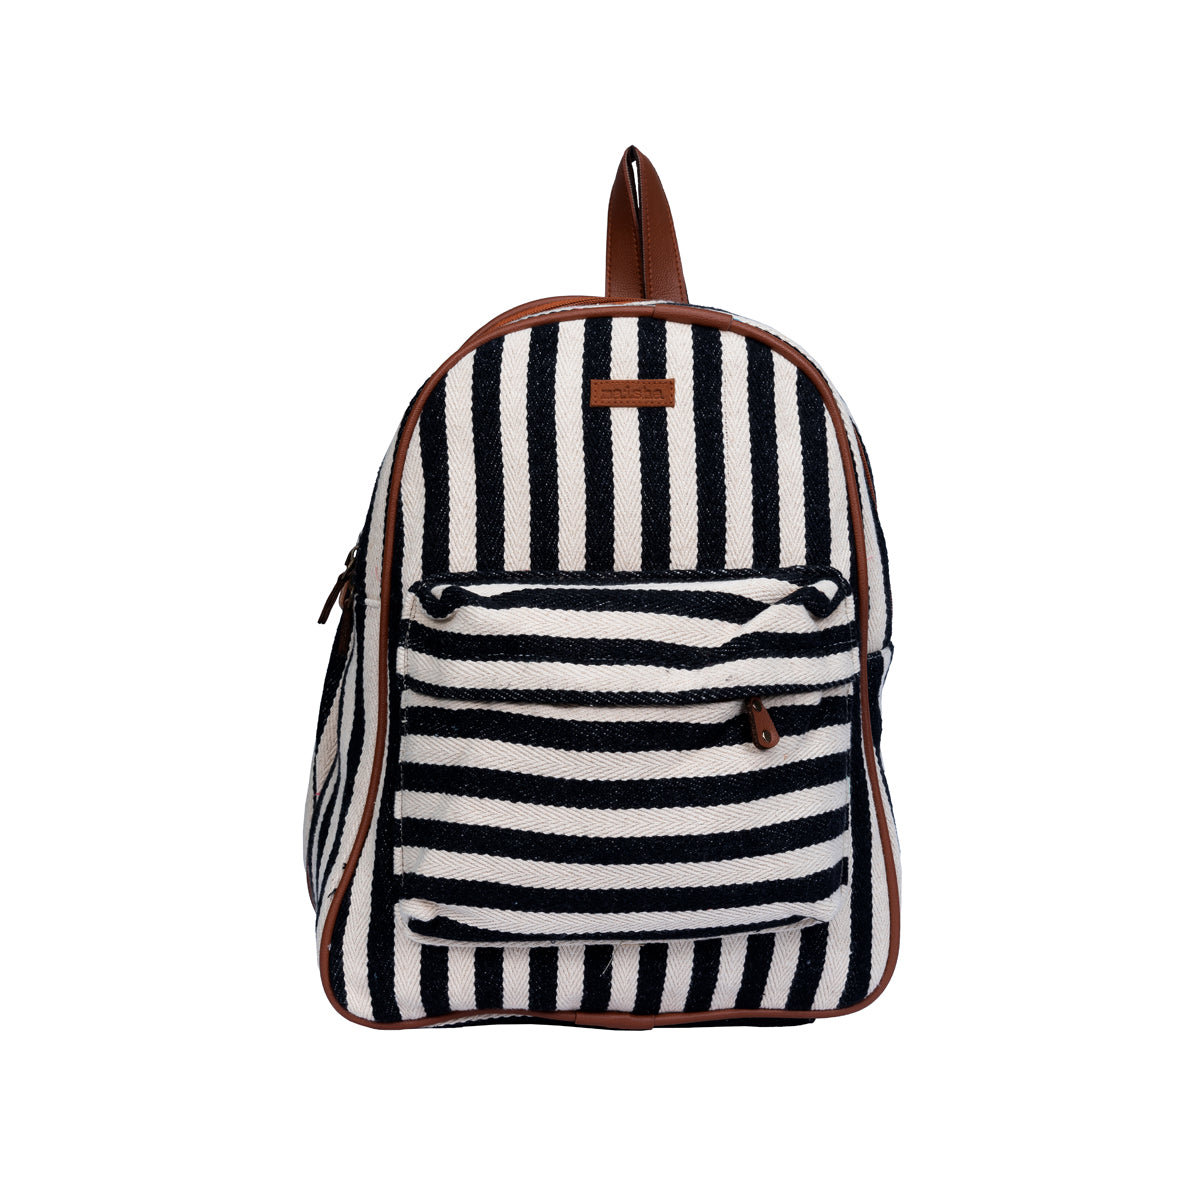 Black And White Stripes Compact Backpack Bag